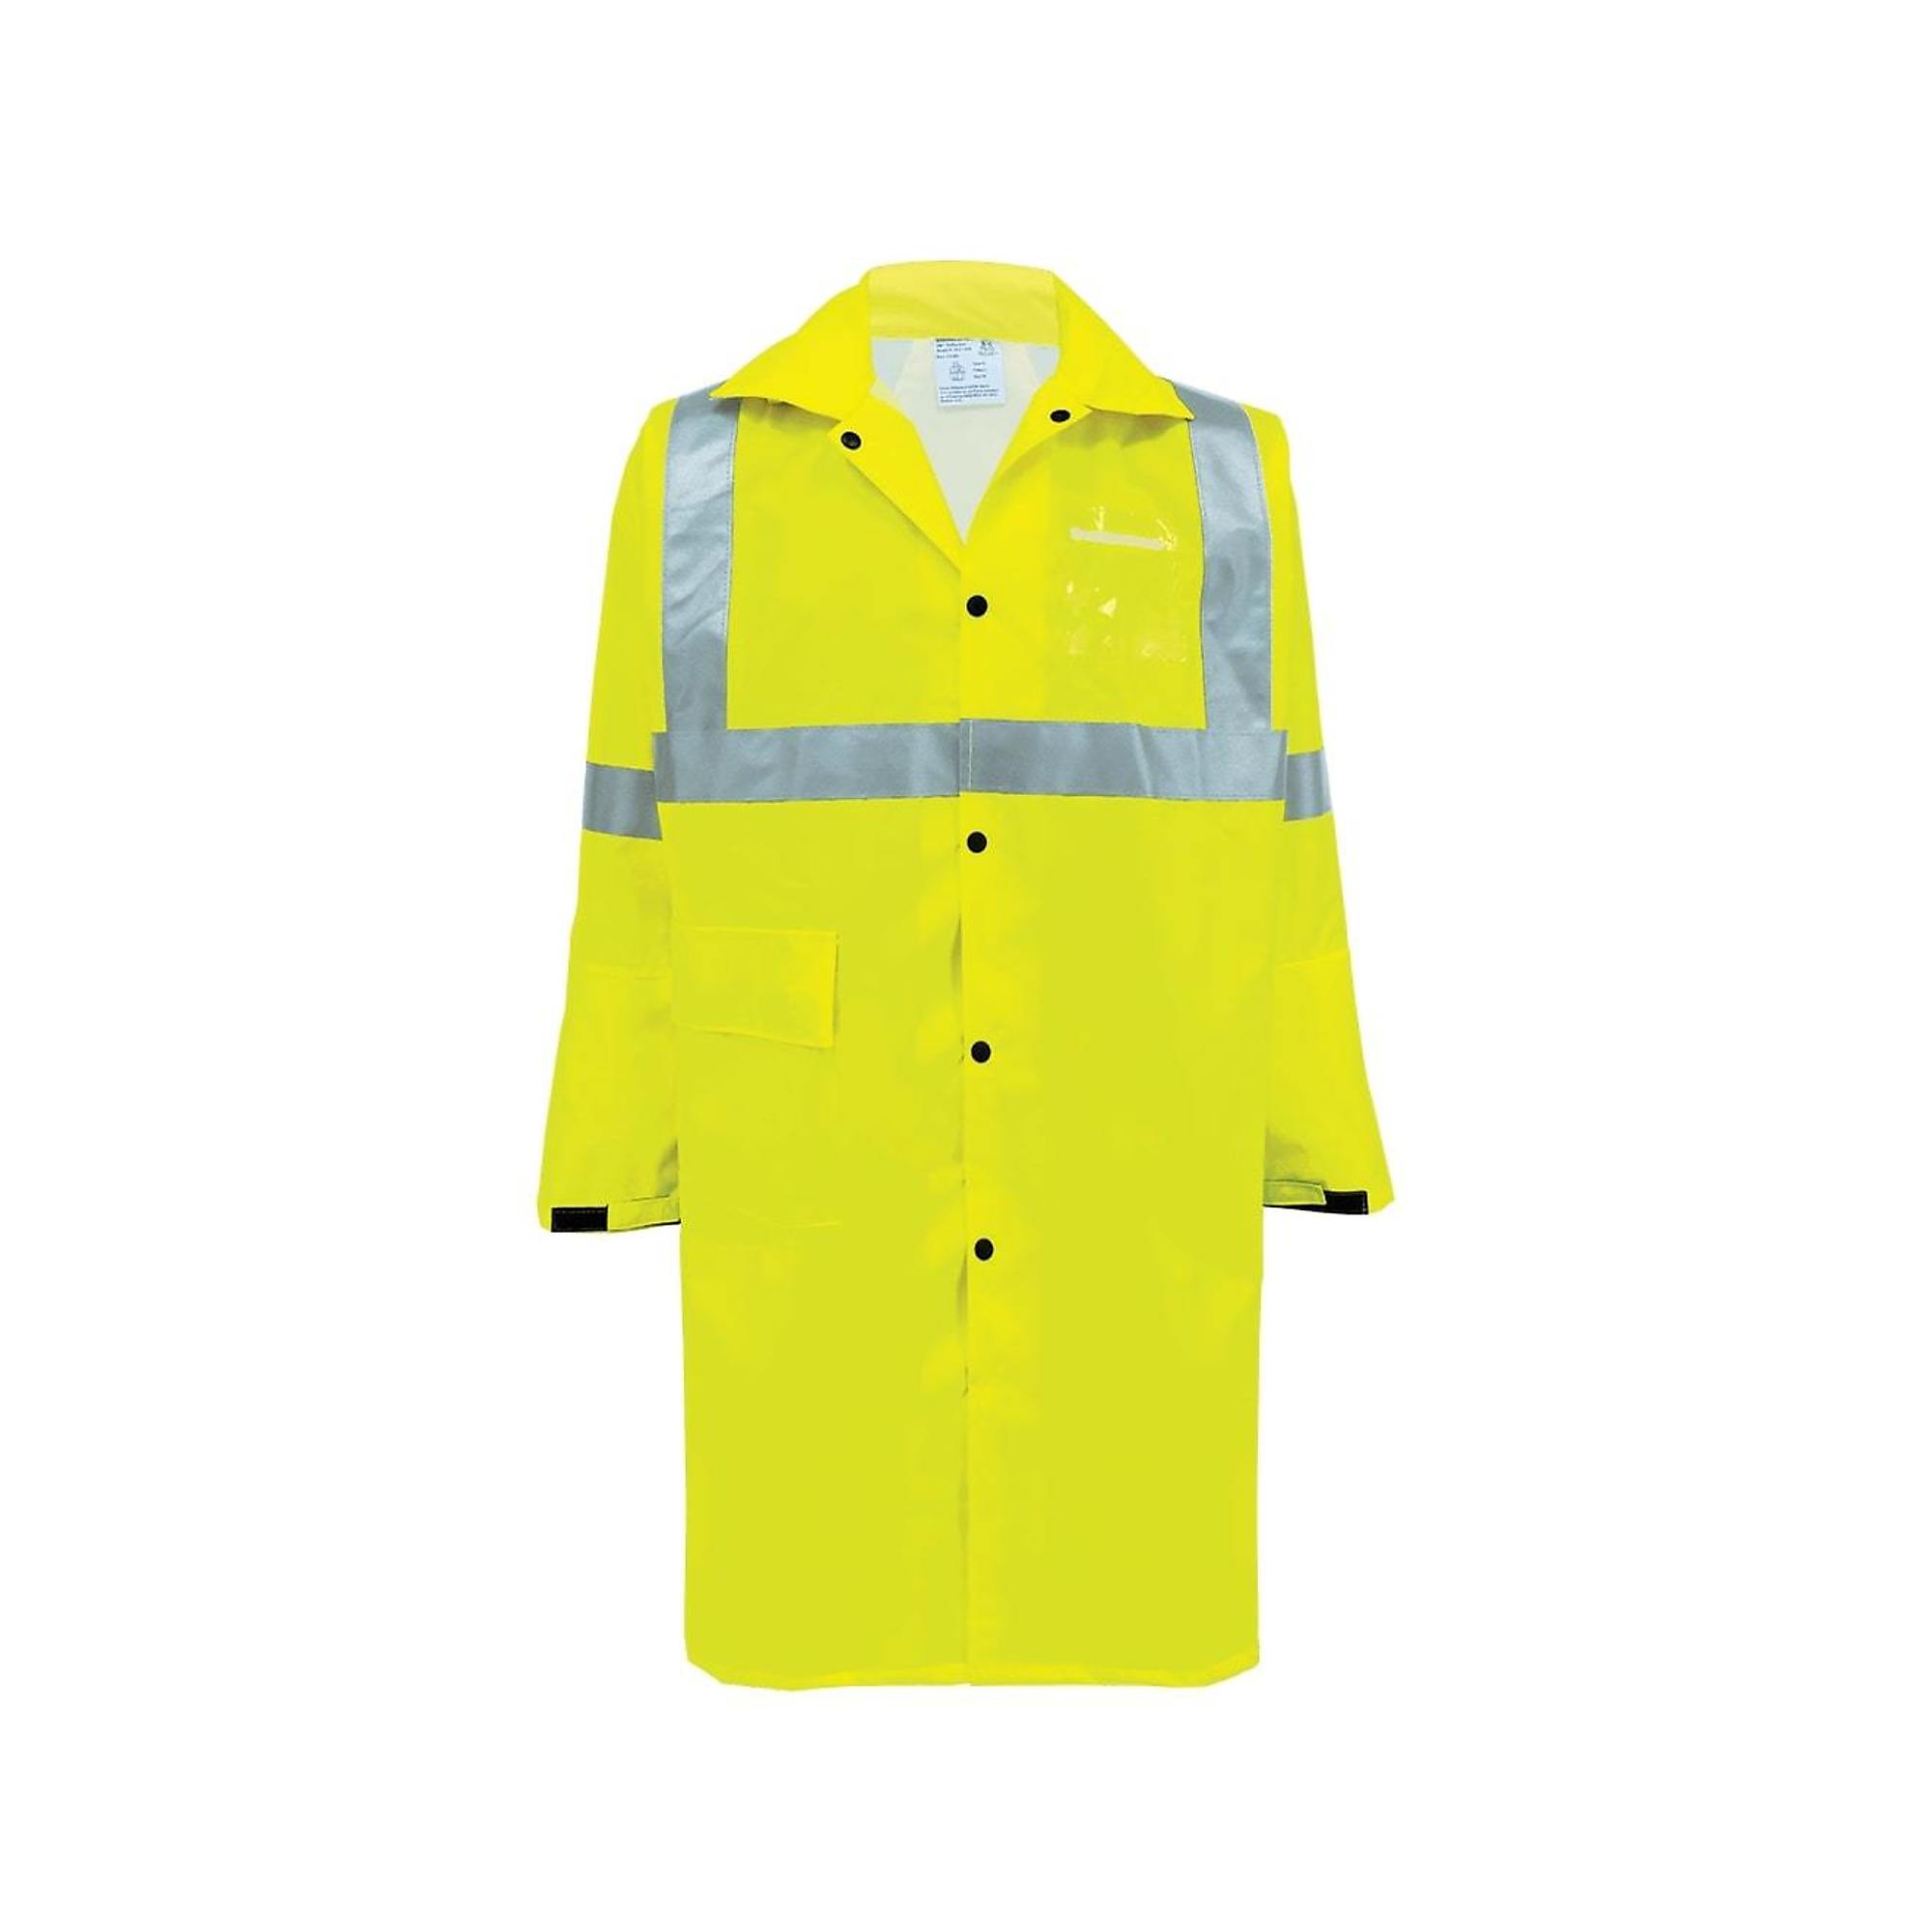 FrogWear, HV Yel/Grn, Class 3 Self-Extinguish, 1 Pocket Duster Jacket, Size M, Color High-Visibility Yellow/Green, Model GLO-1450-M